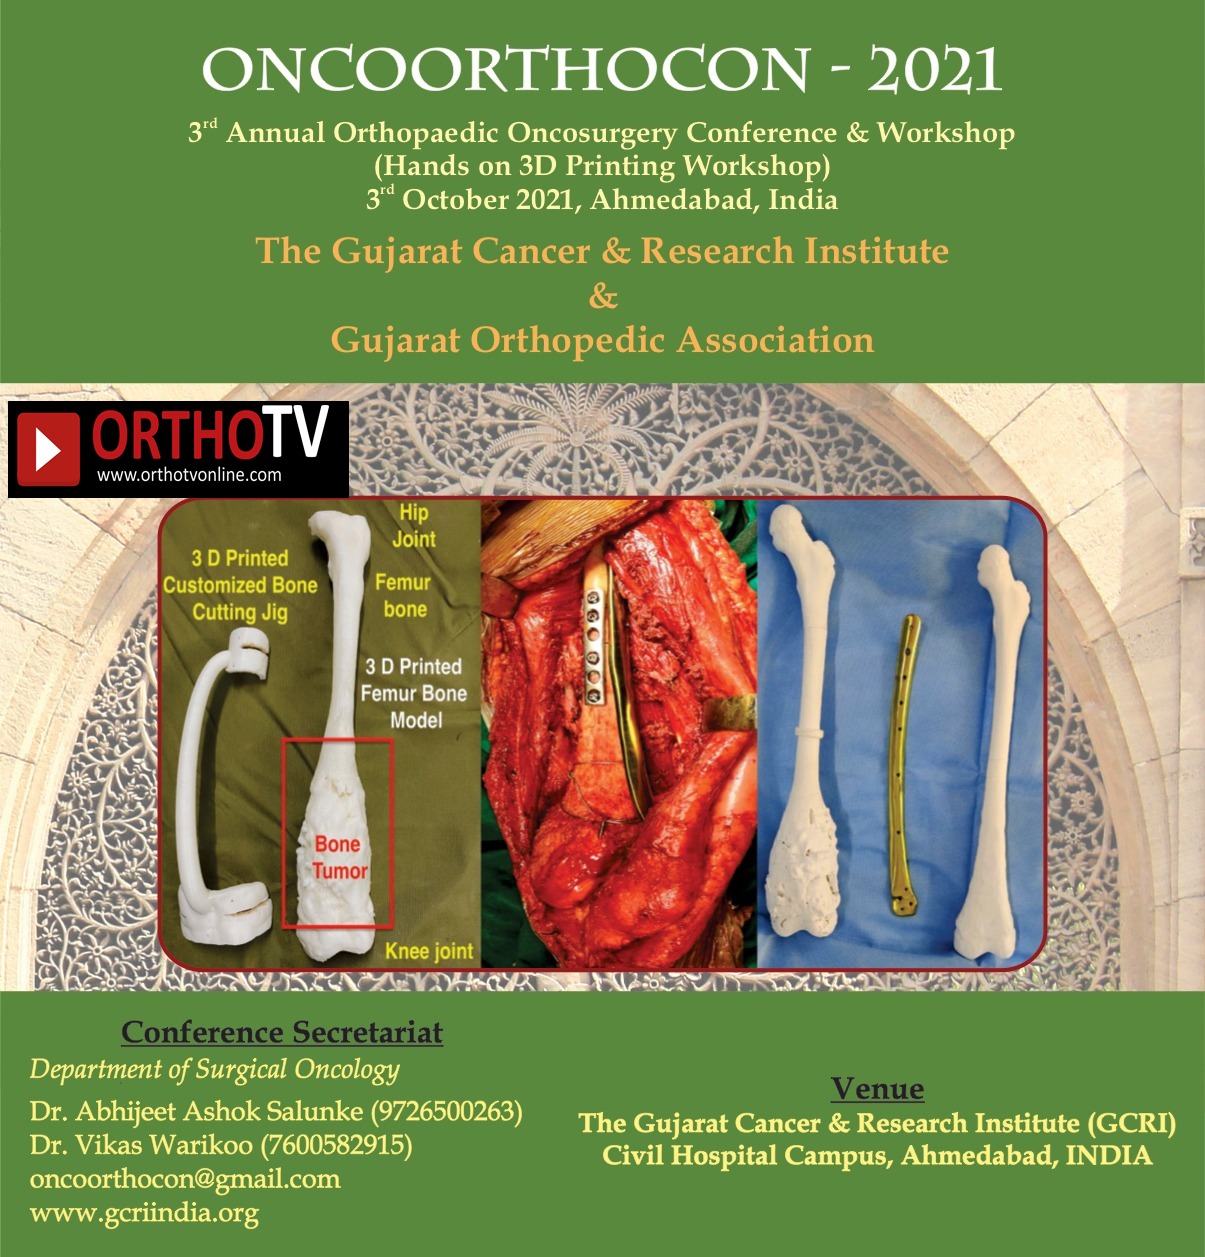 ONCOORTHOCON 2021 (3 rd Annual Orthopaedic Oncosurgery Conference & Workshop )